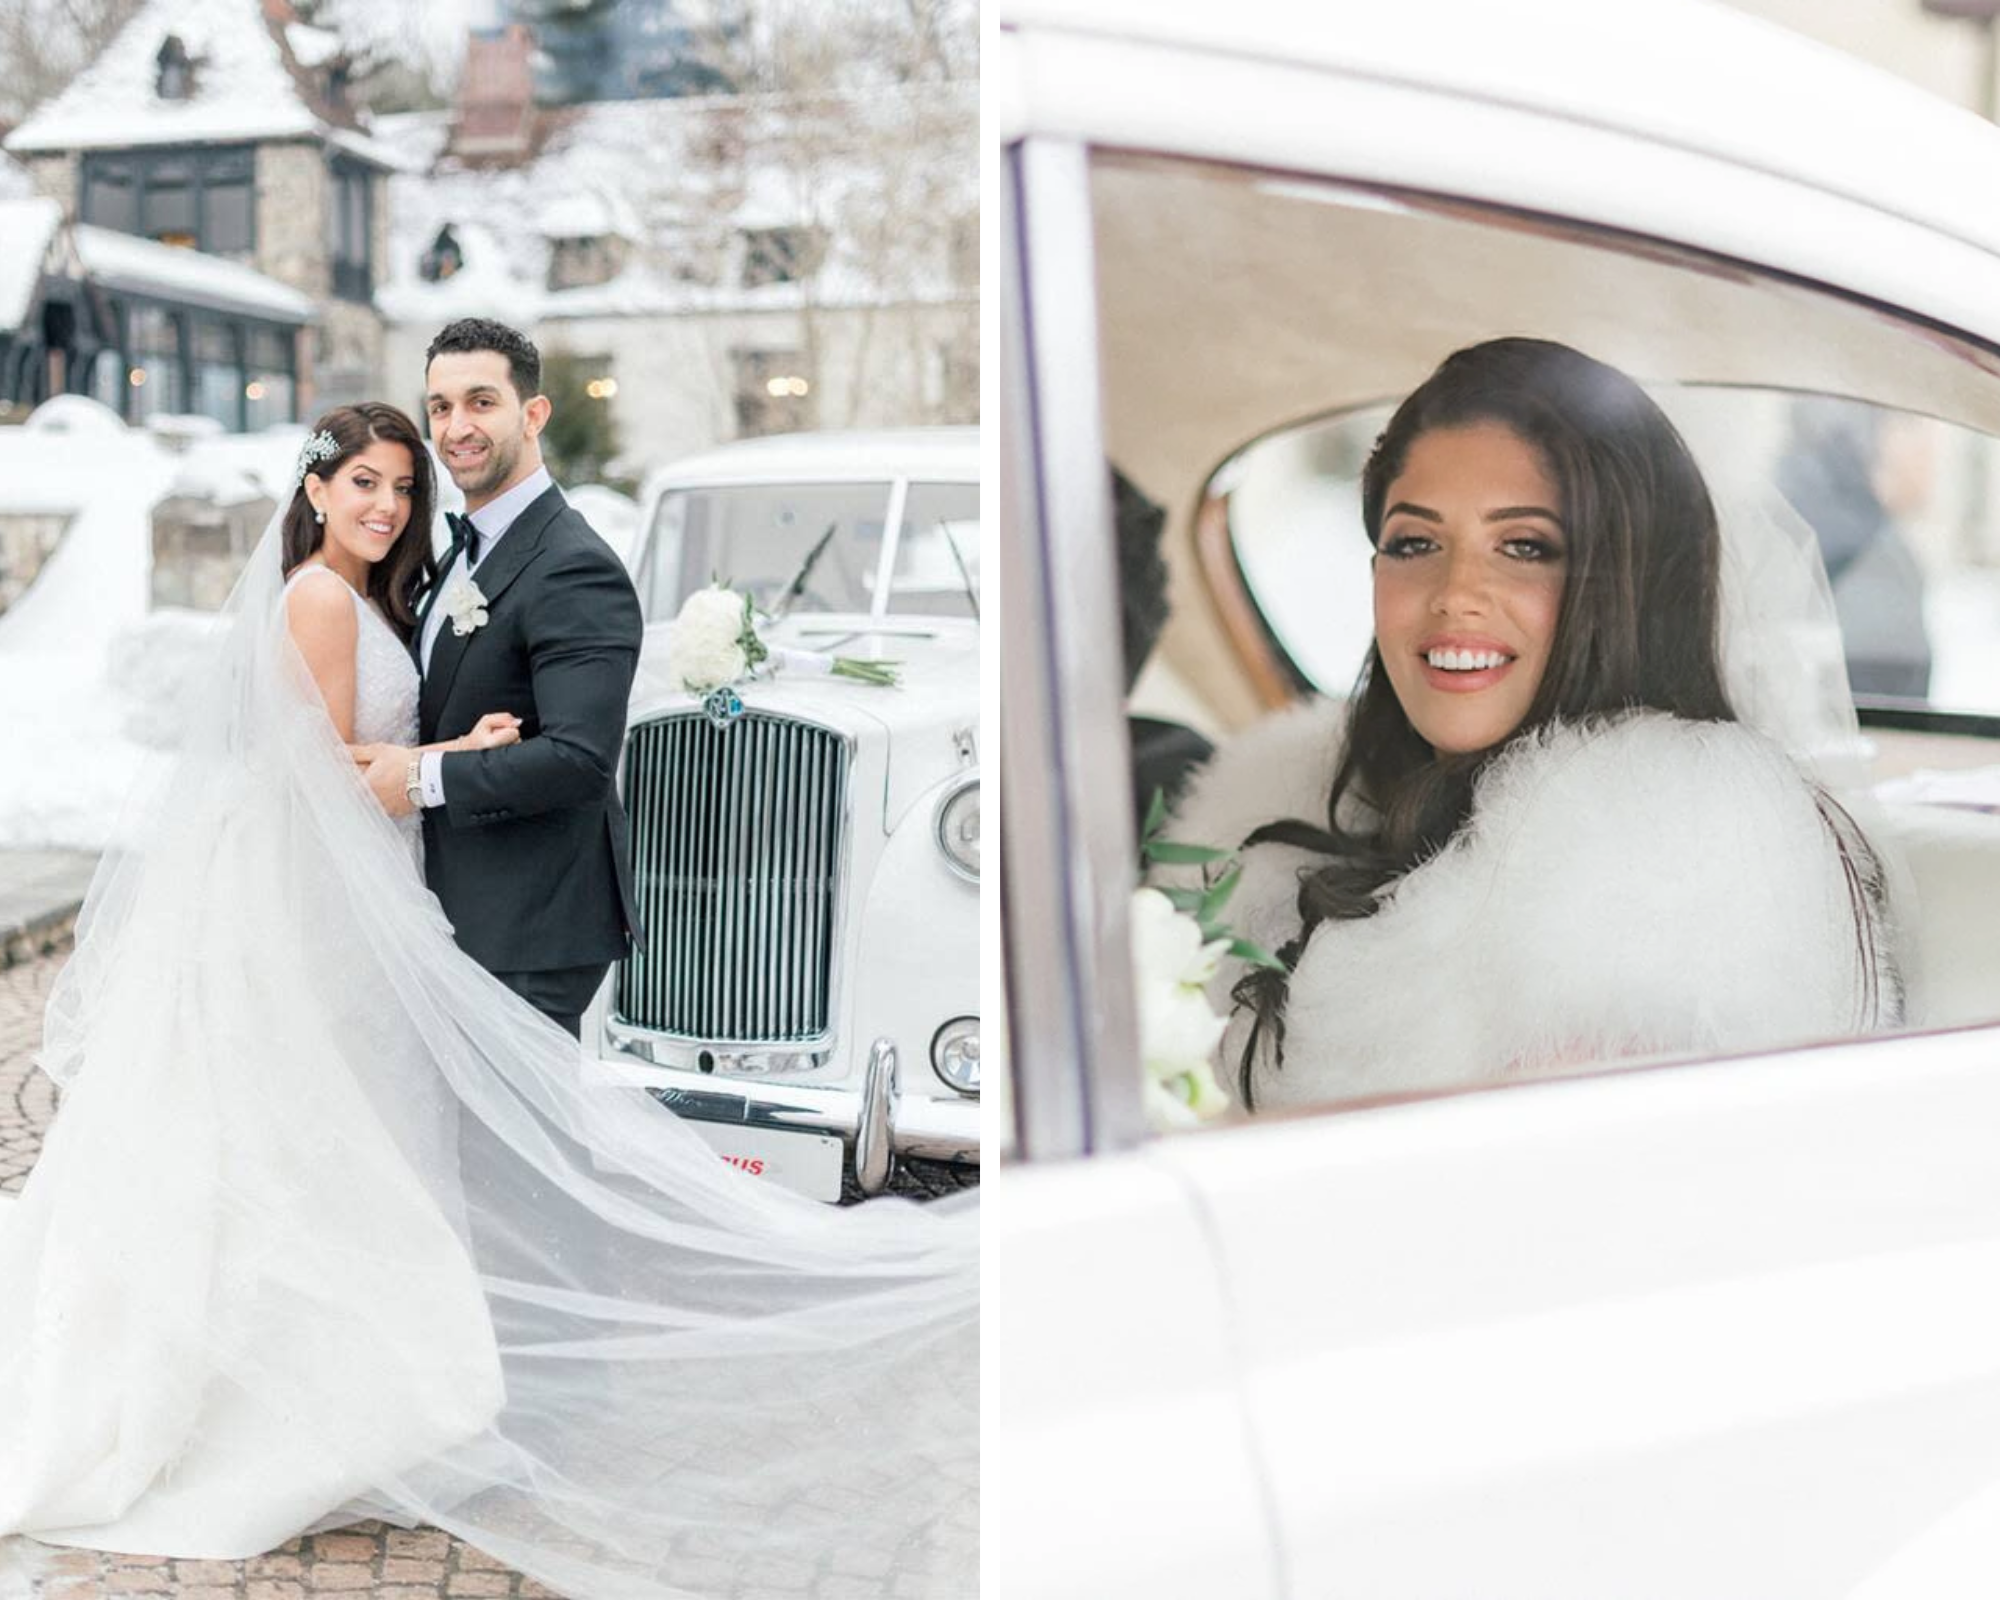 A beautiful bride and groom outside in the snow. And Victoria being driven to her ceremony in a white Rolls Royce.